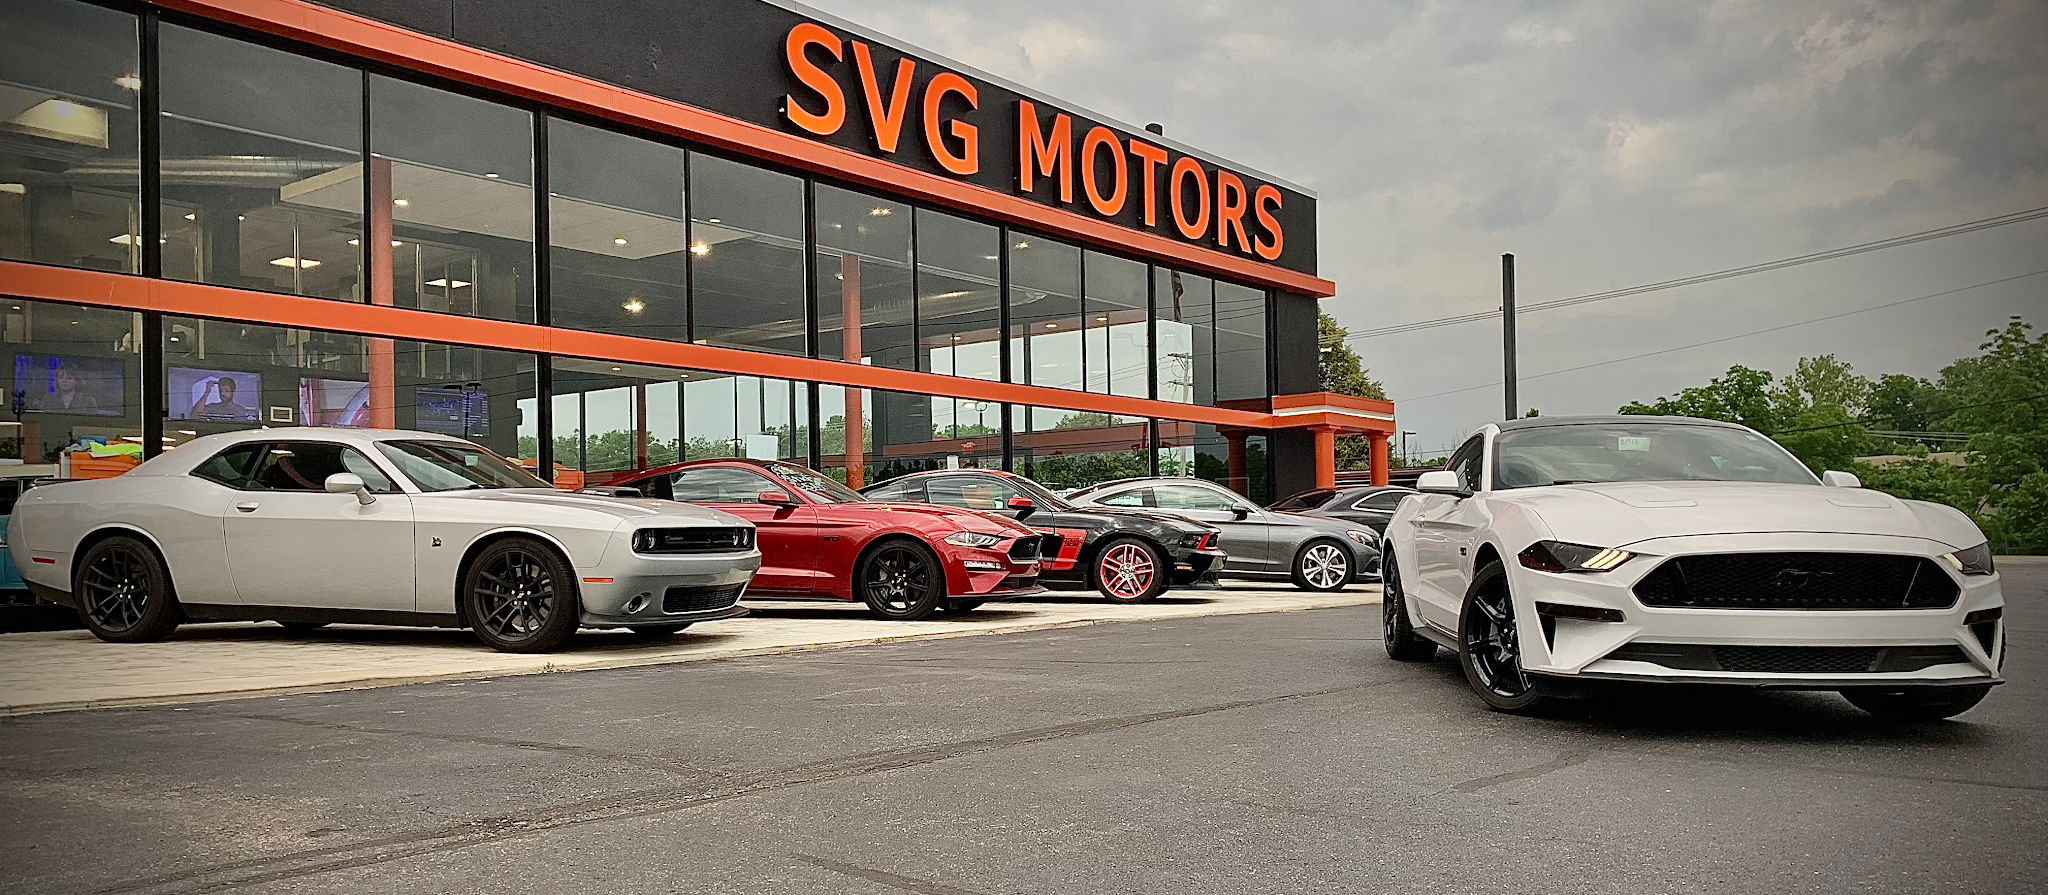 Services & Products SVG Motors in Beavercreek OH